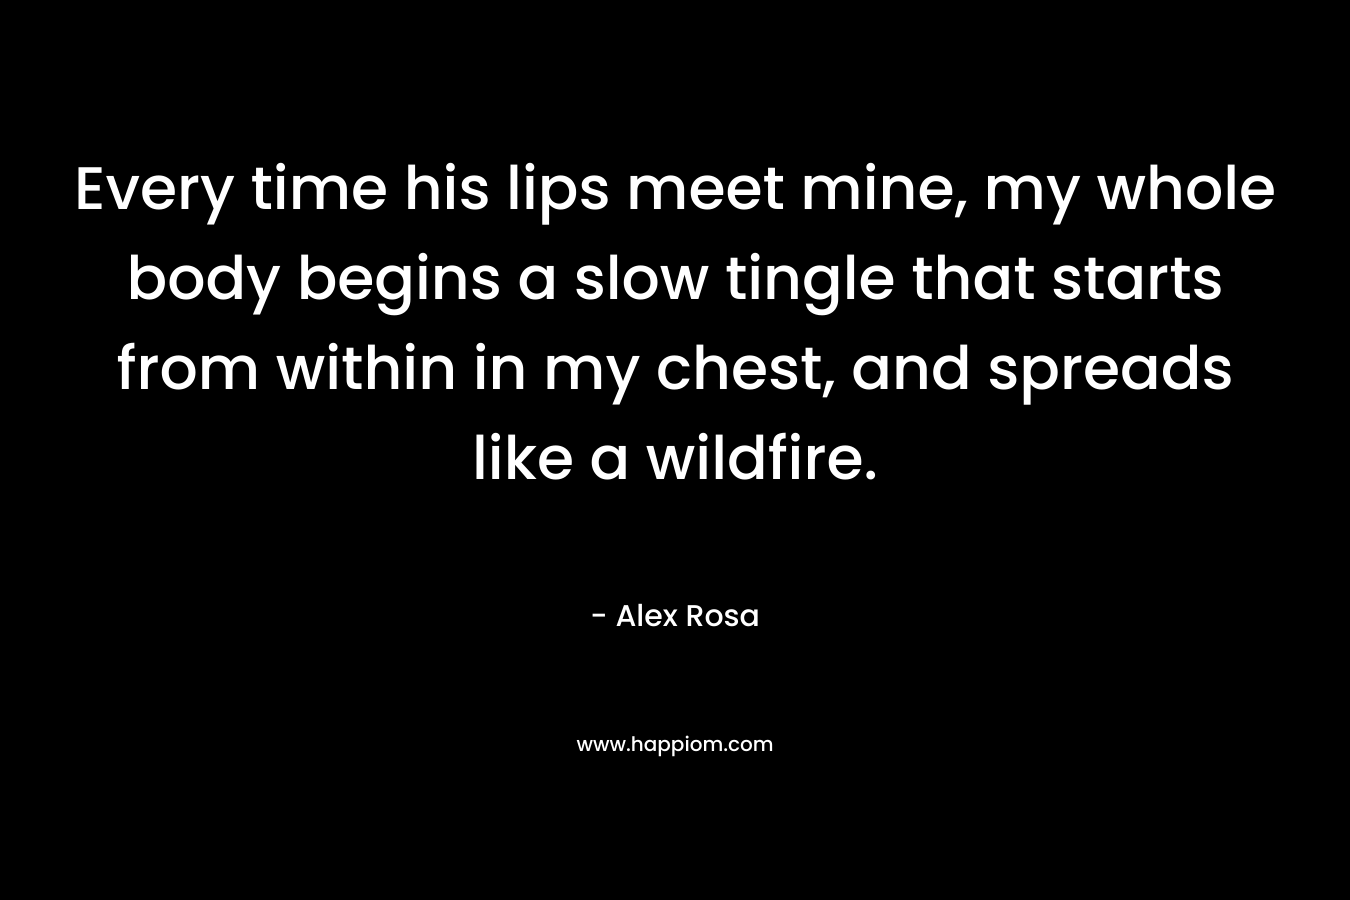 Every time his lips meet mine, my whole body begins a slow tingle that starts from within in my chest, and spreads like a wildfire.